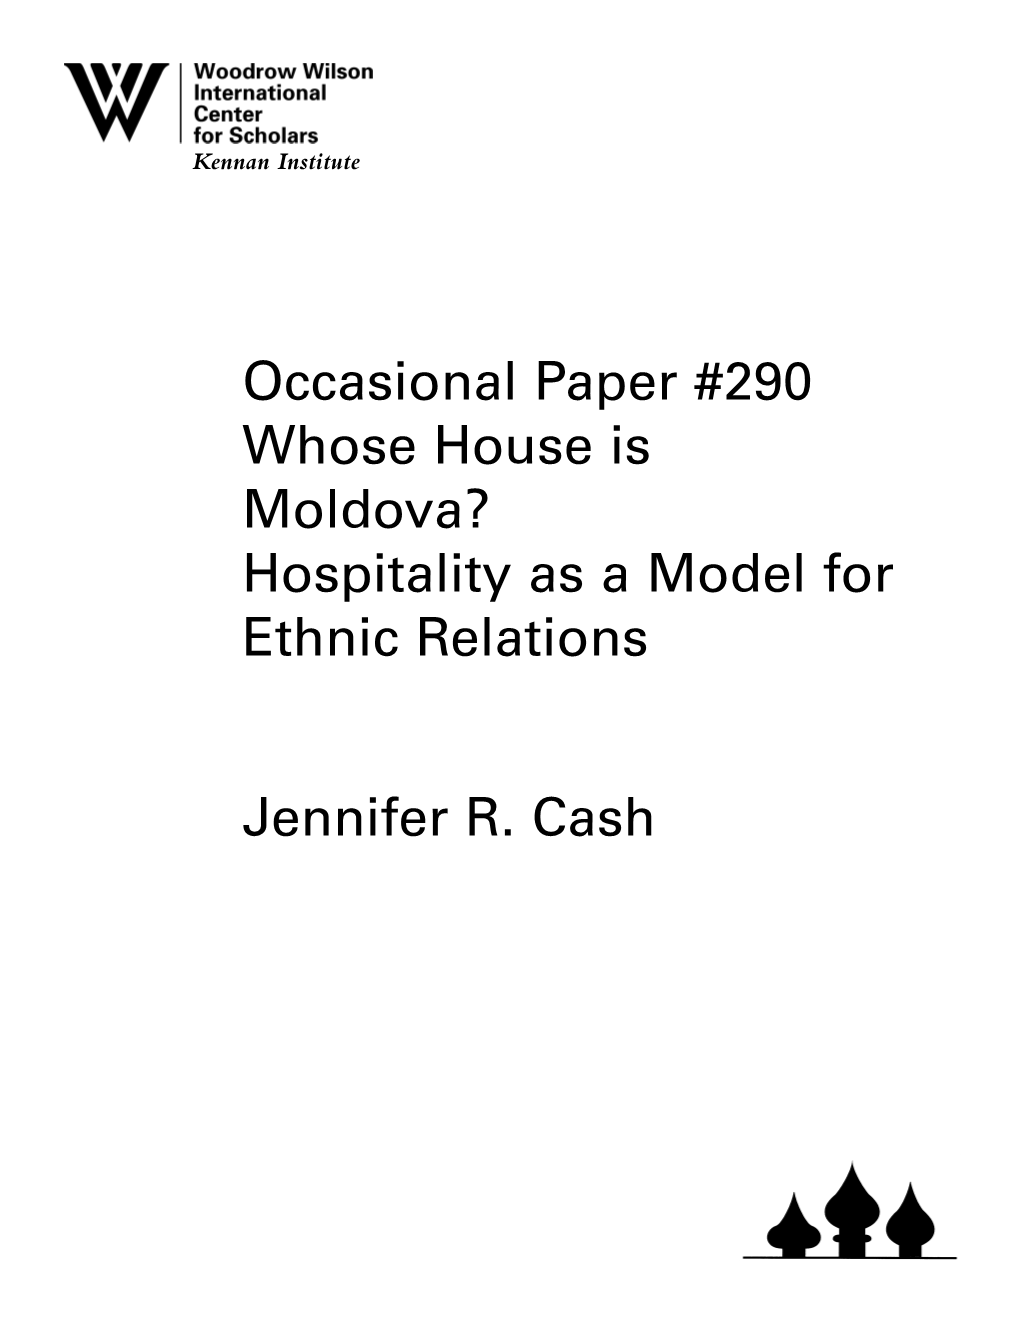 Occasional Paper #290 Whose House Is Moldova? Hospitality As a Model for Ethnic Relations Jennifer R. Cash